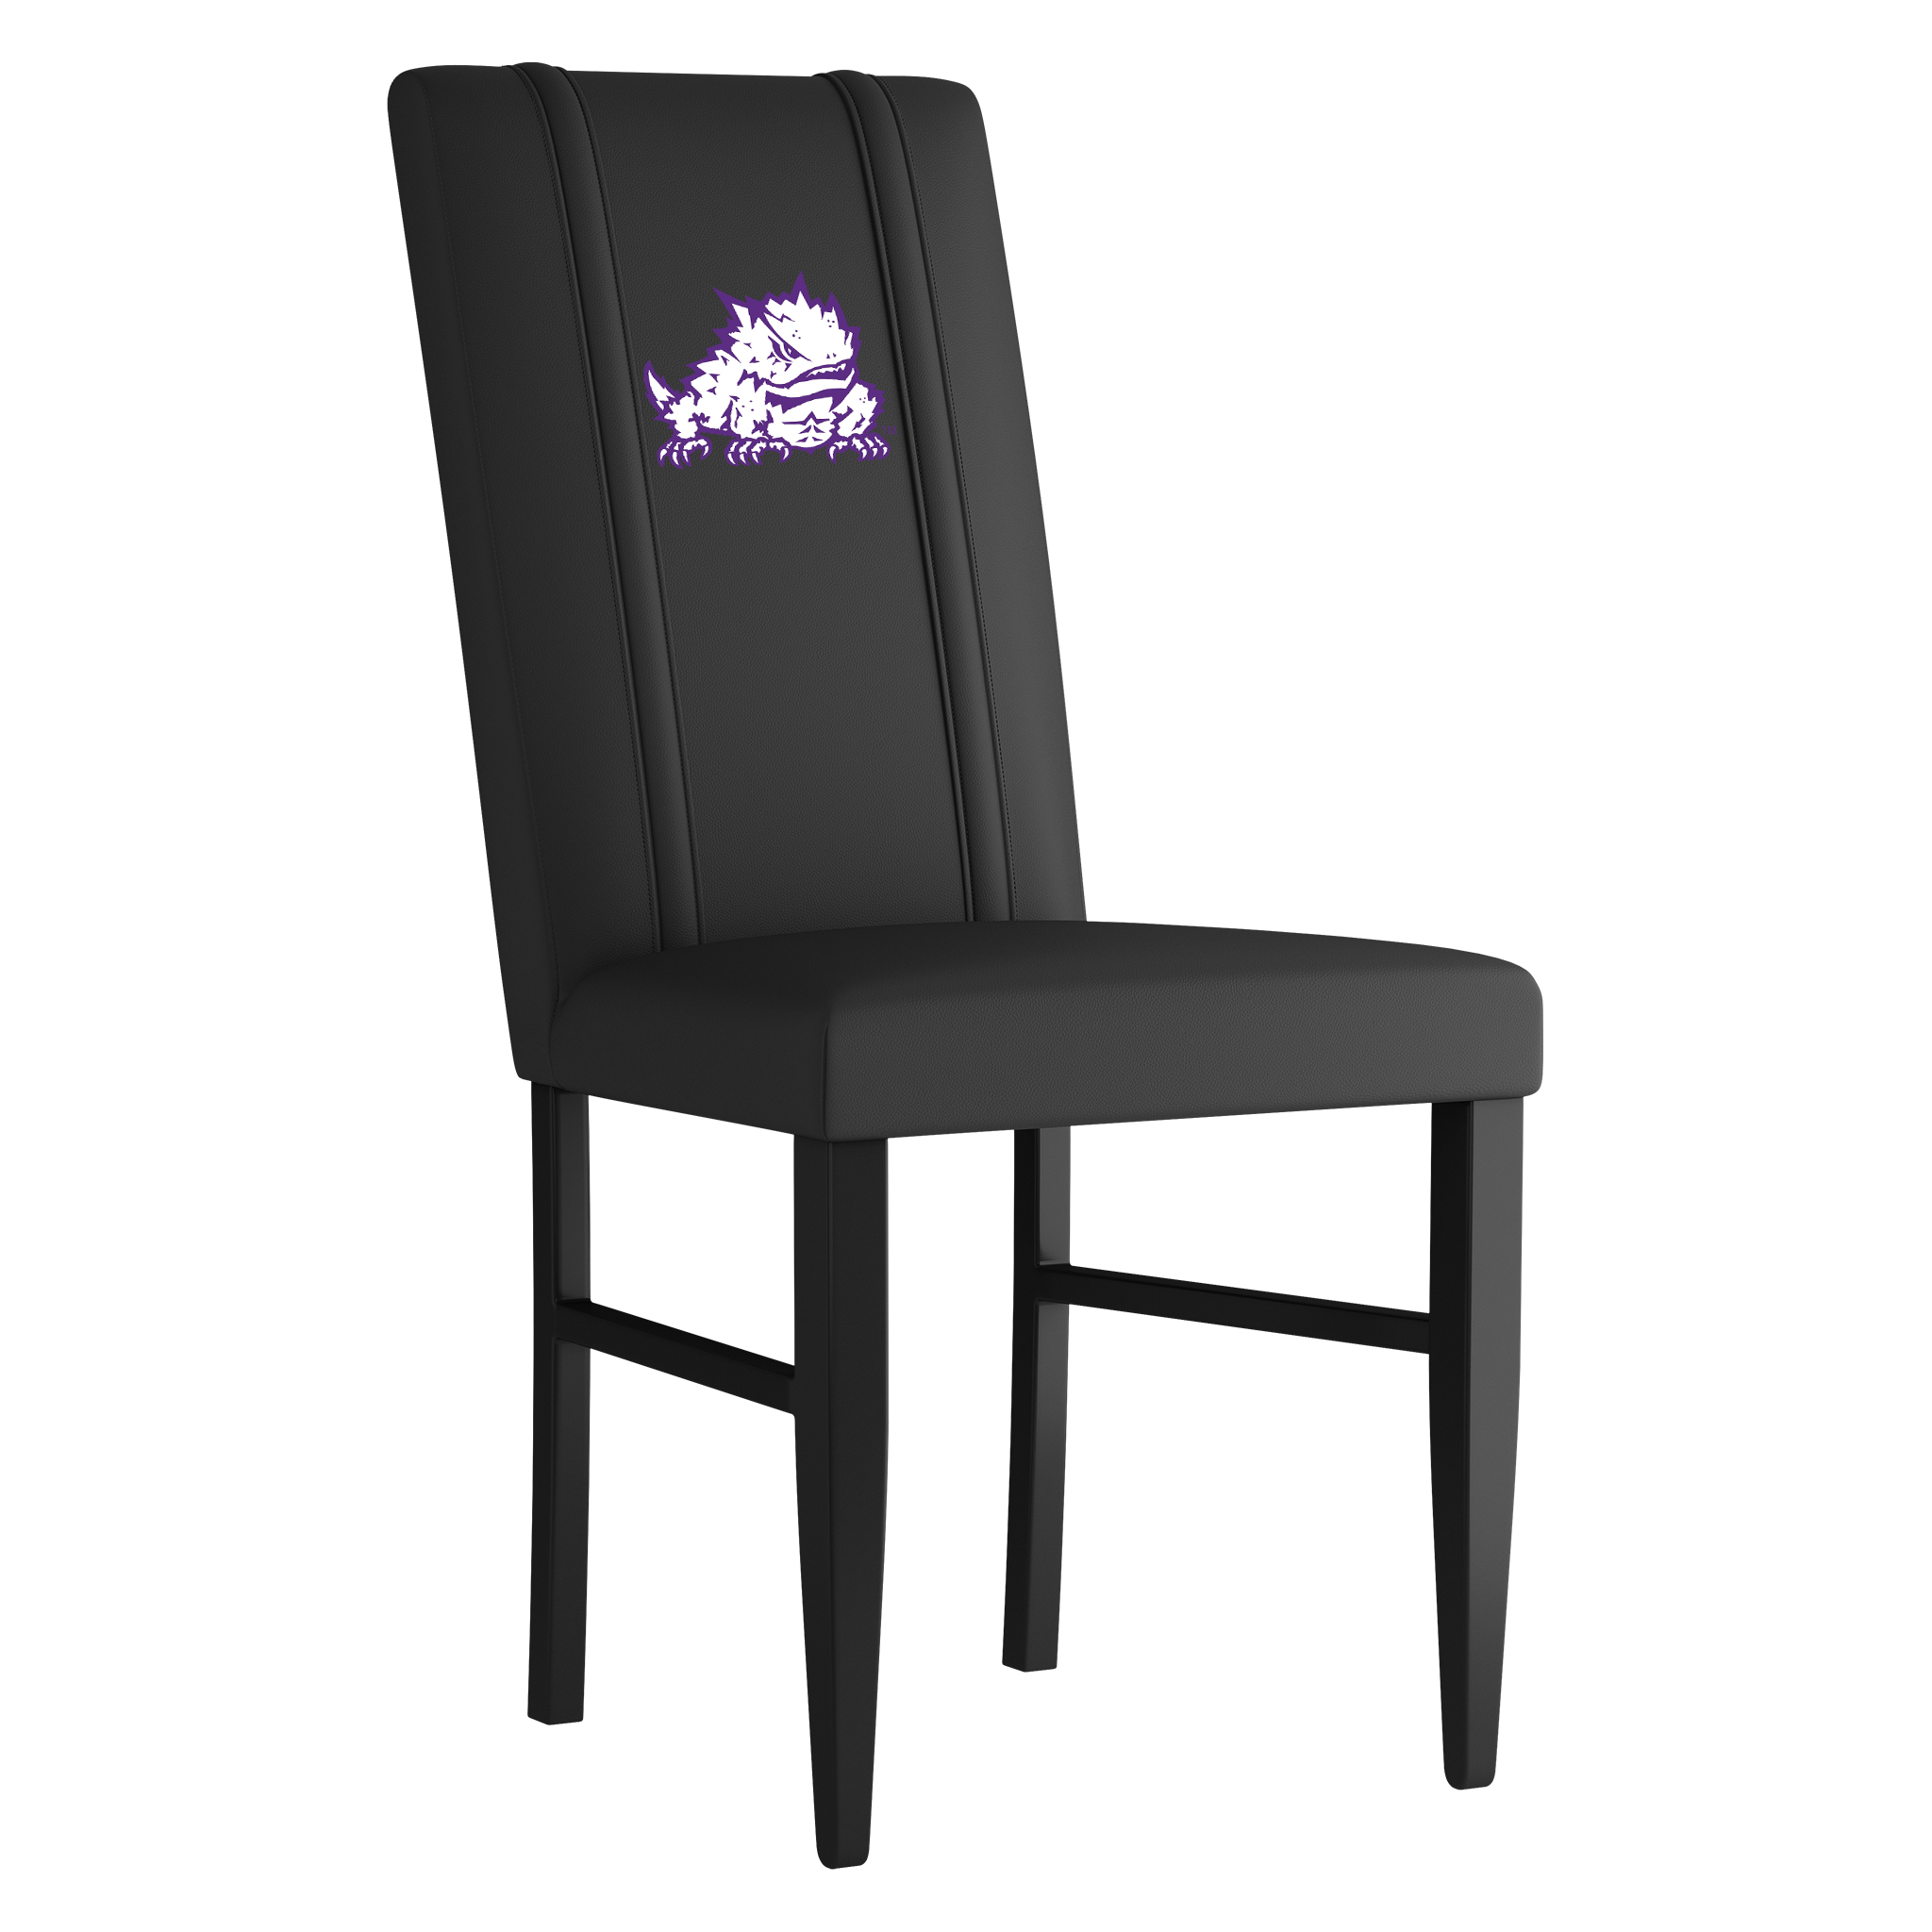 Tcu Horned Frogs Side Chair 2000 With Tcu Horned Frogs Secondary